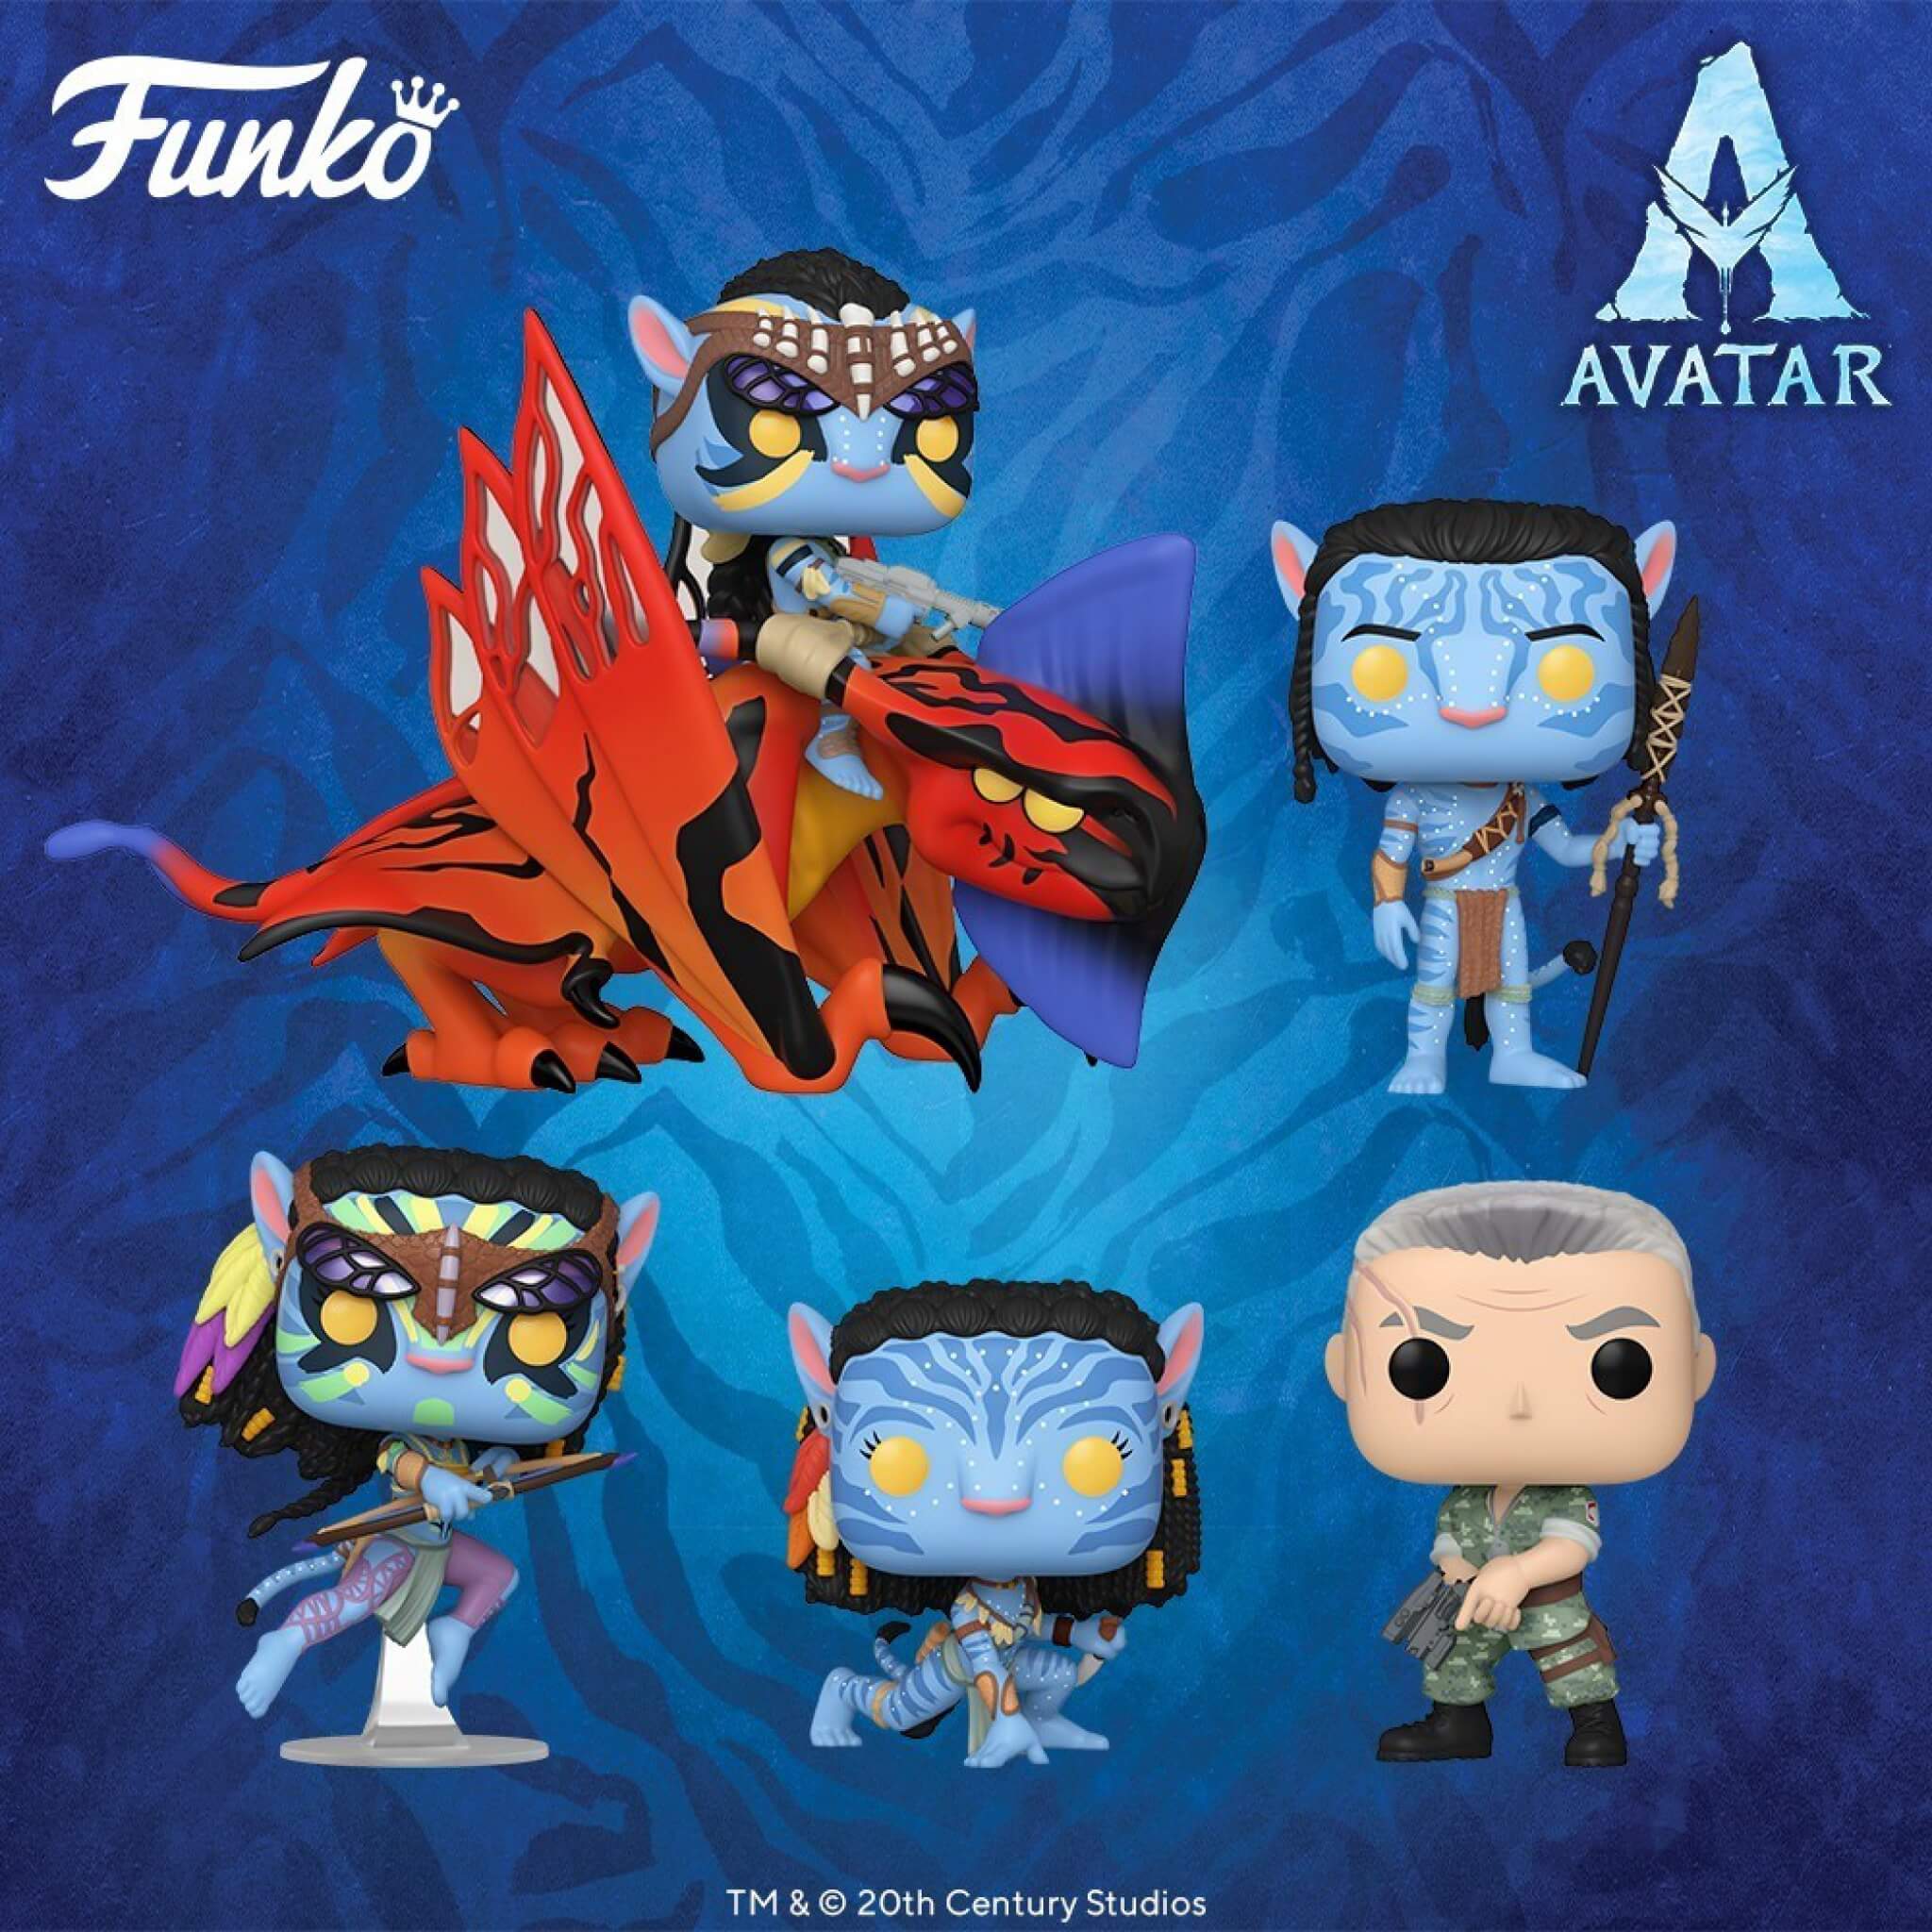 Funko unveils the very first POPs of the movie Avatar